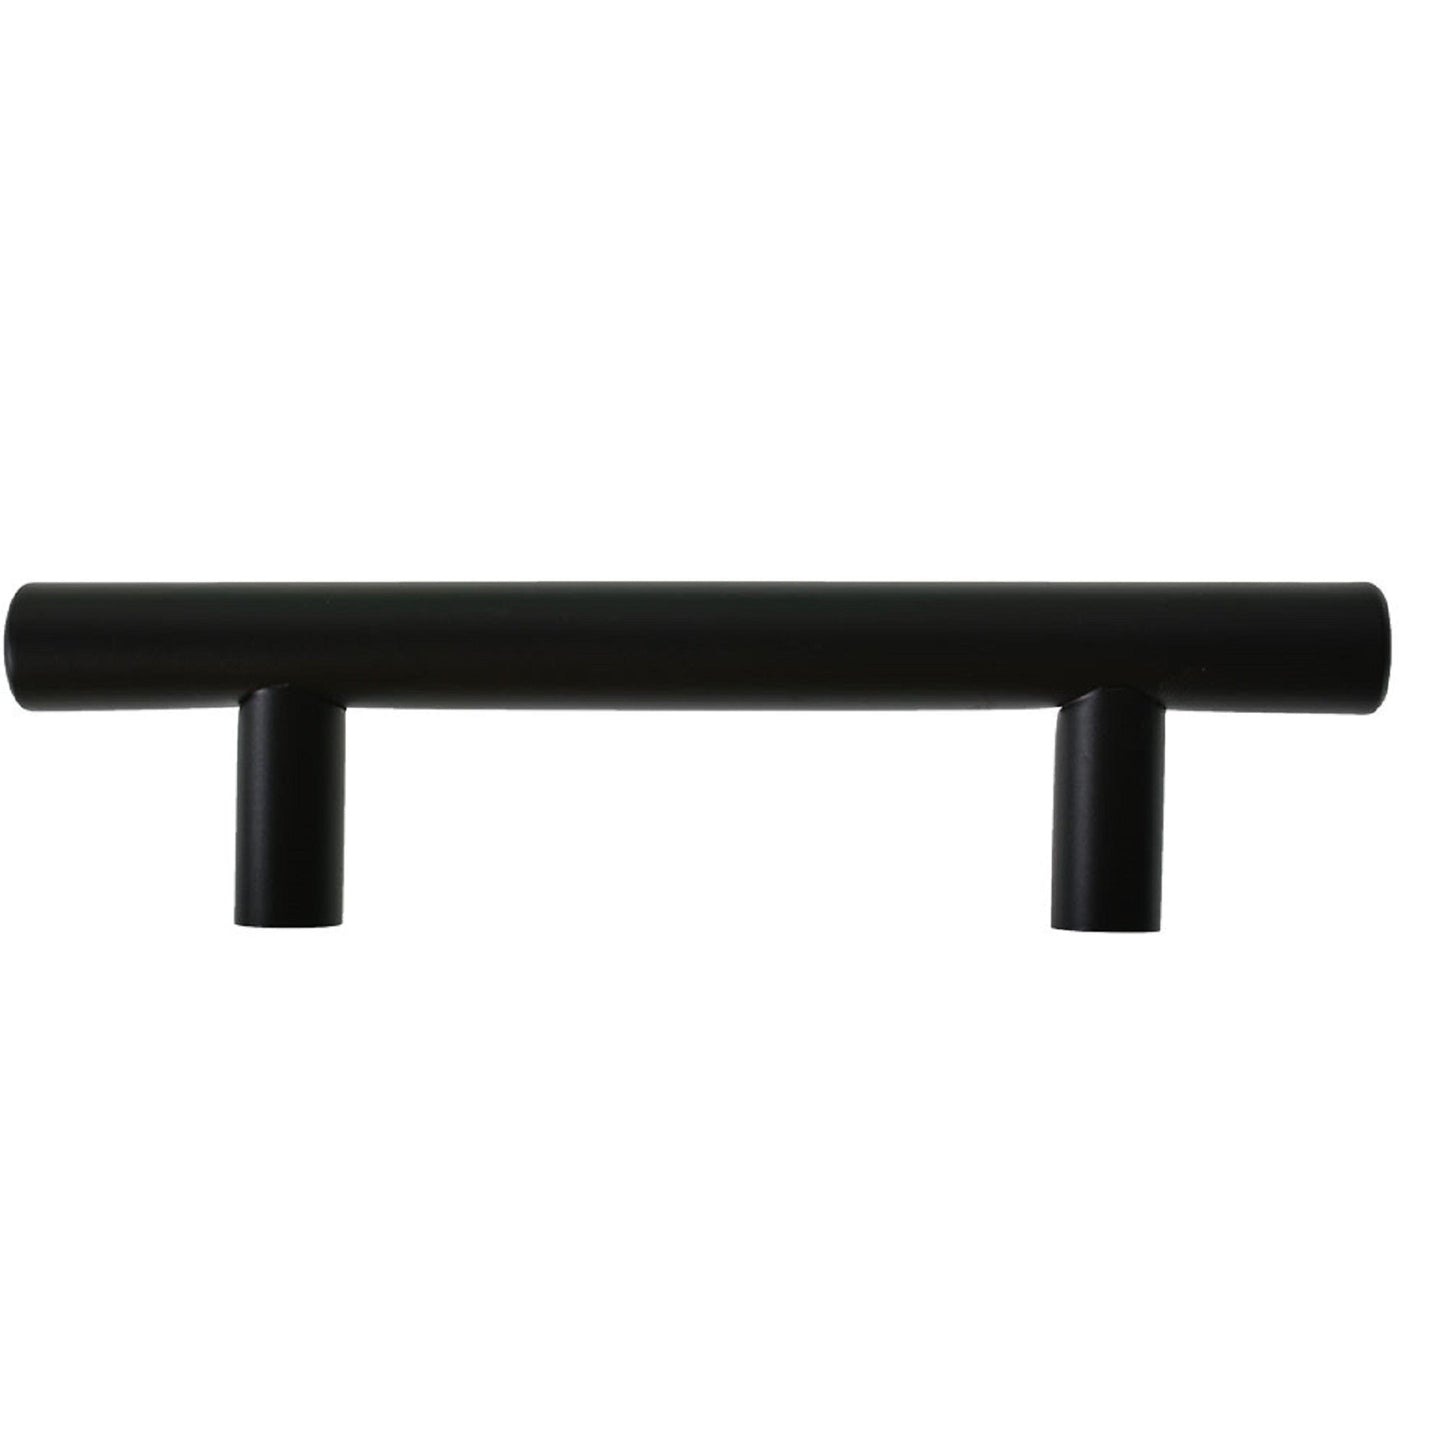 findmall  30 Pack 5 Inch Cabinet Handle Black Stainless Steel Drawer Pulls Cabinet Pulls Bar Kitchen Handles 3 Inch Hole Center FINDMALLPARTS